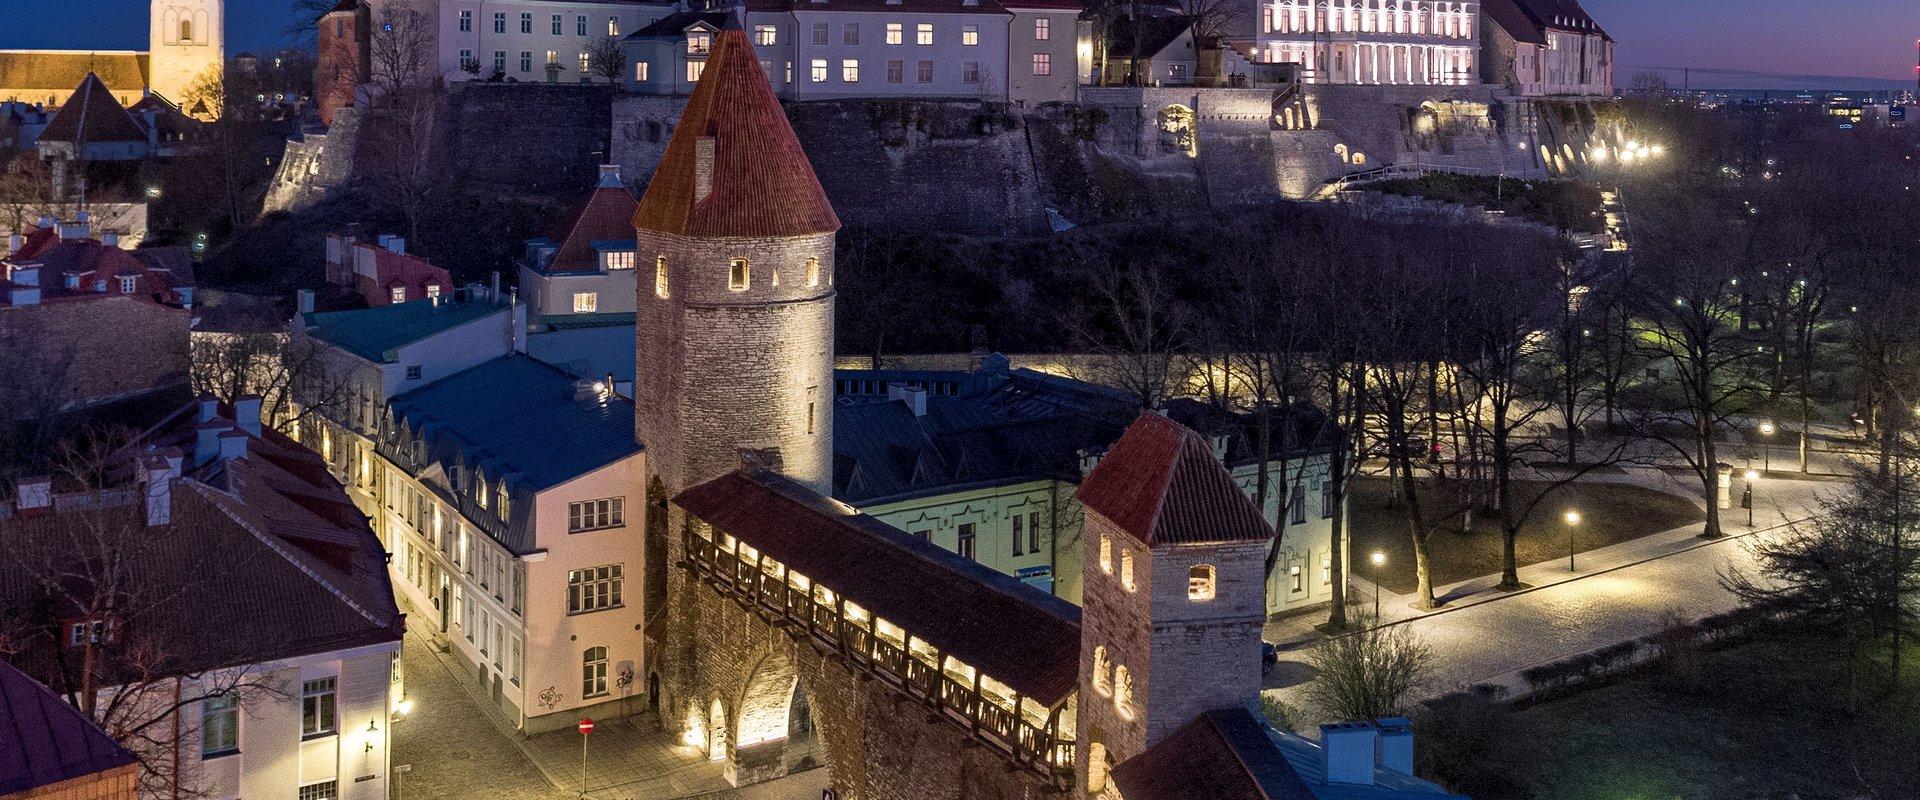 See the Old Town: free audio guide tour "Whisperings of the City Wall"